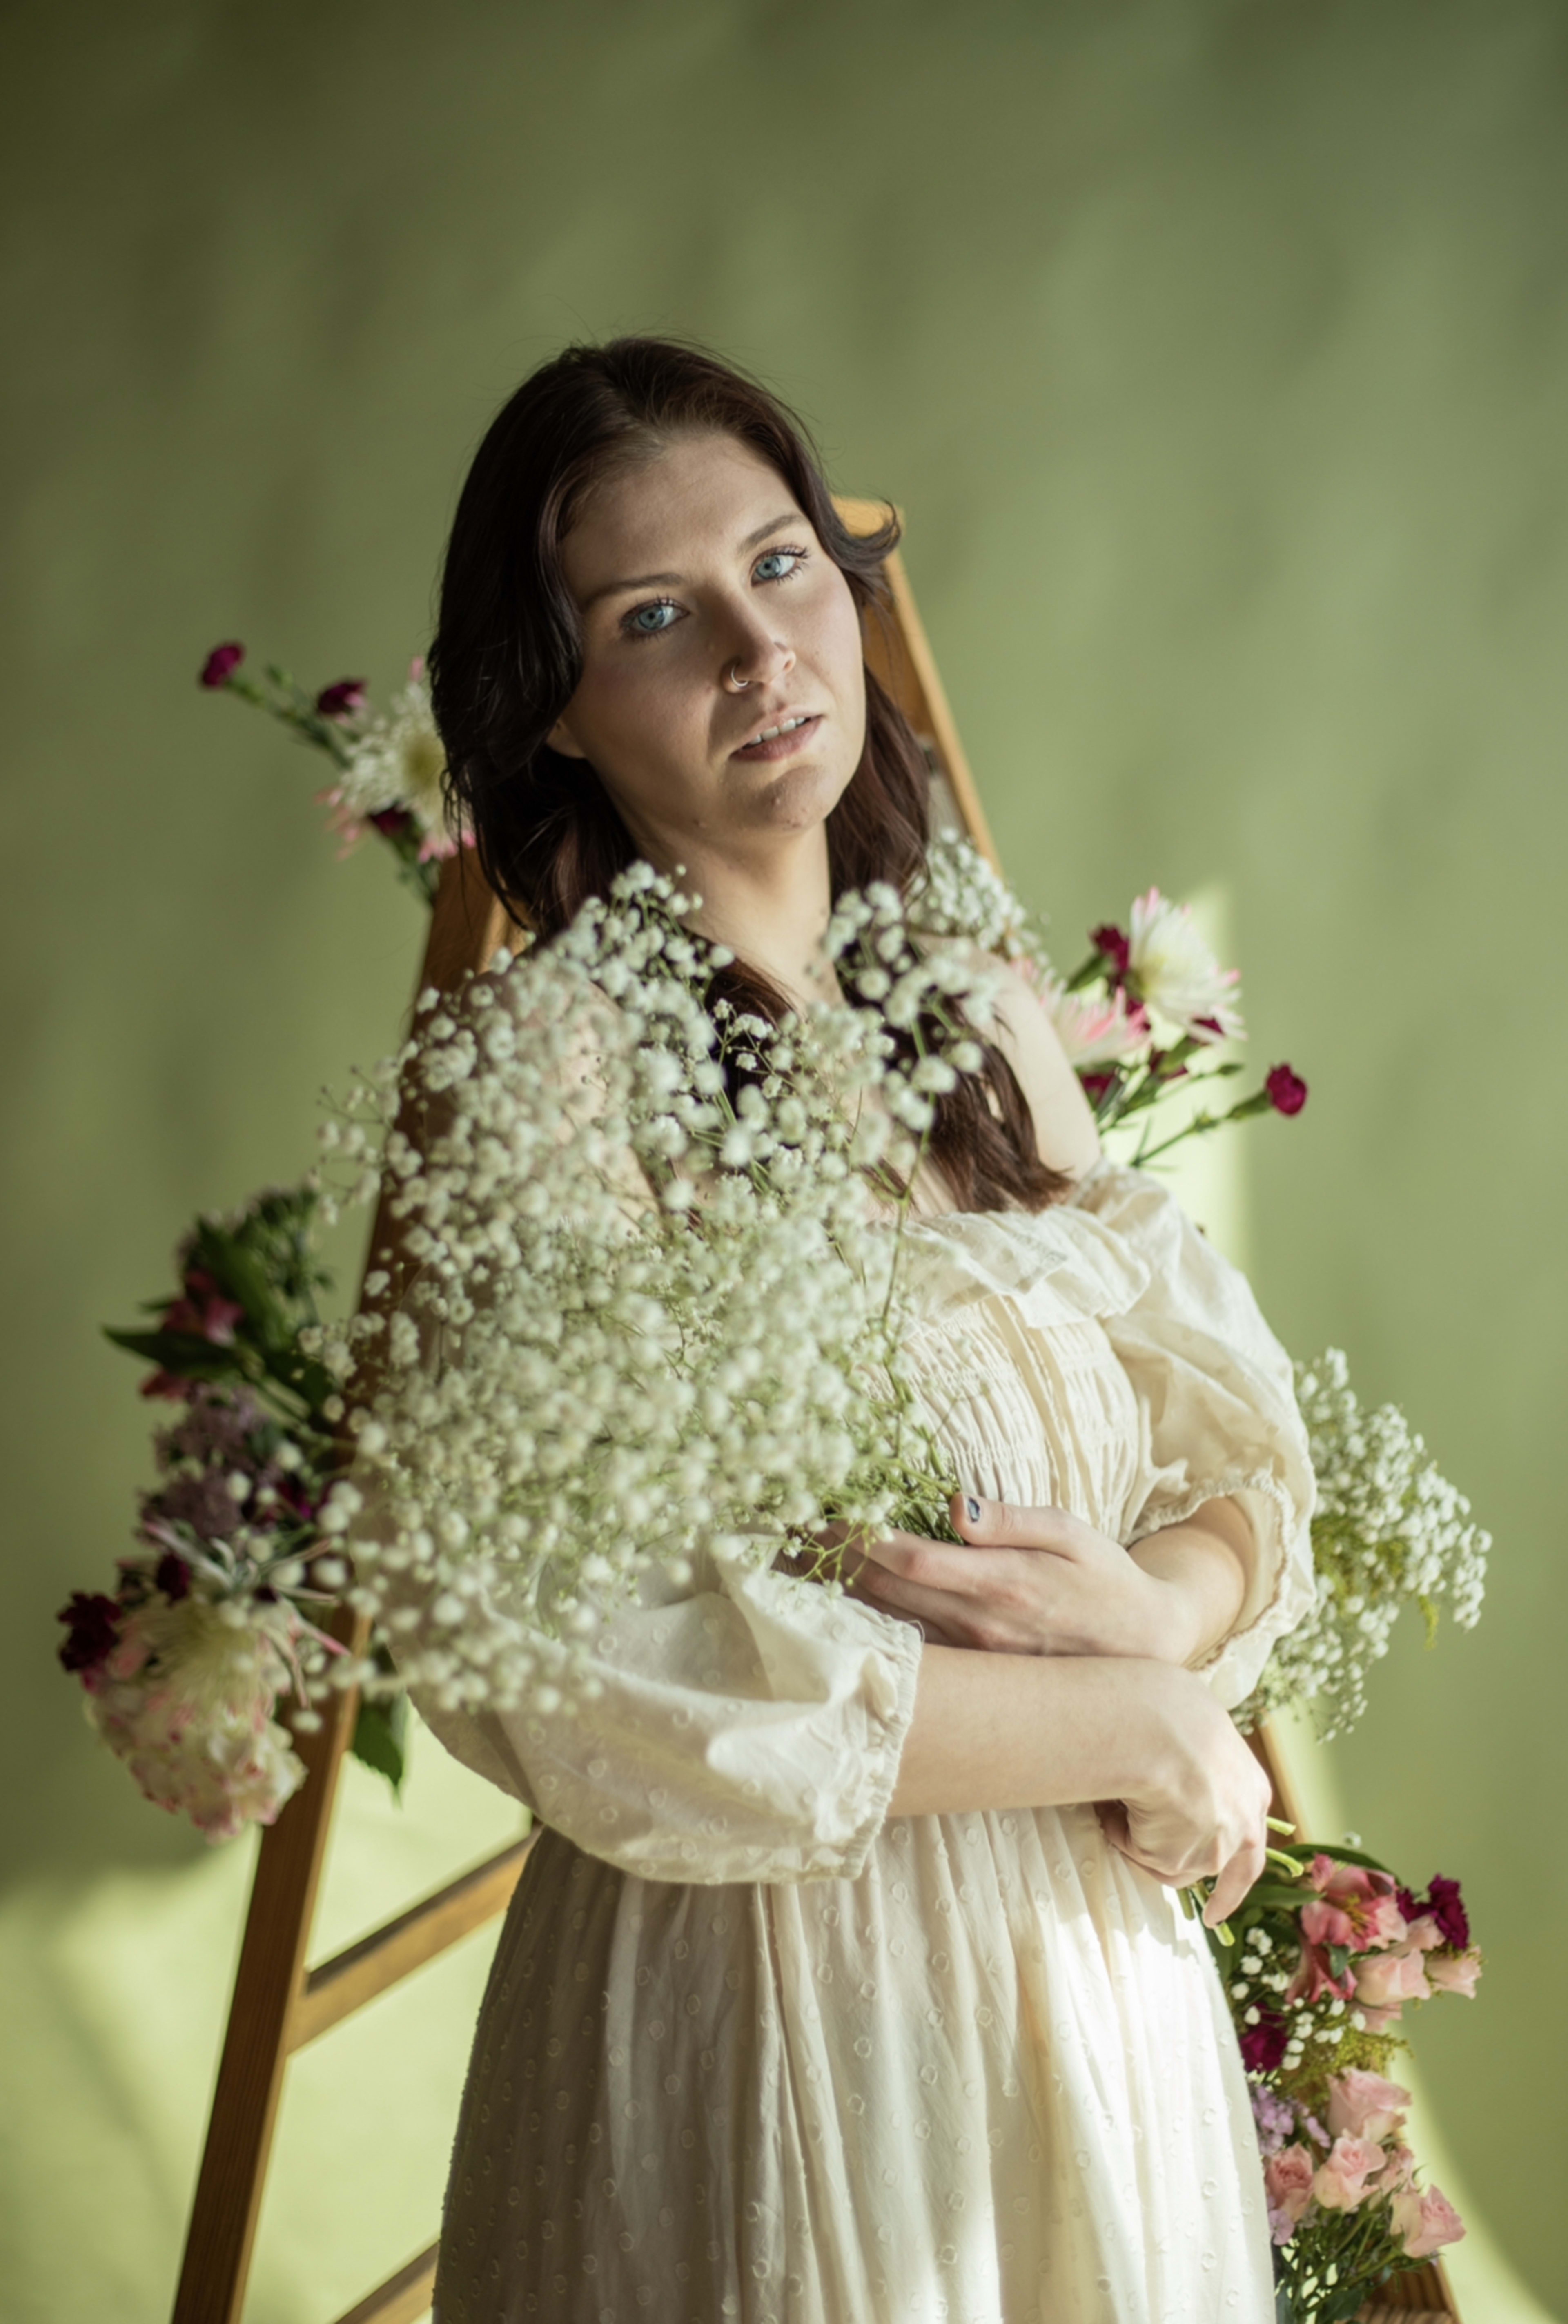 A fashion photoshoot featuring a white-dressed woman and a bouquet of spring flowers.